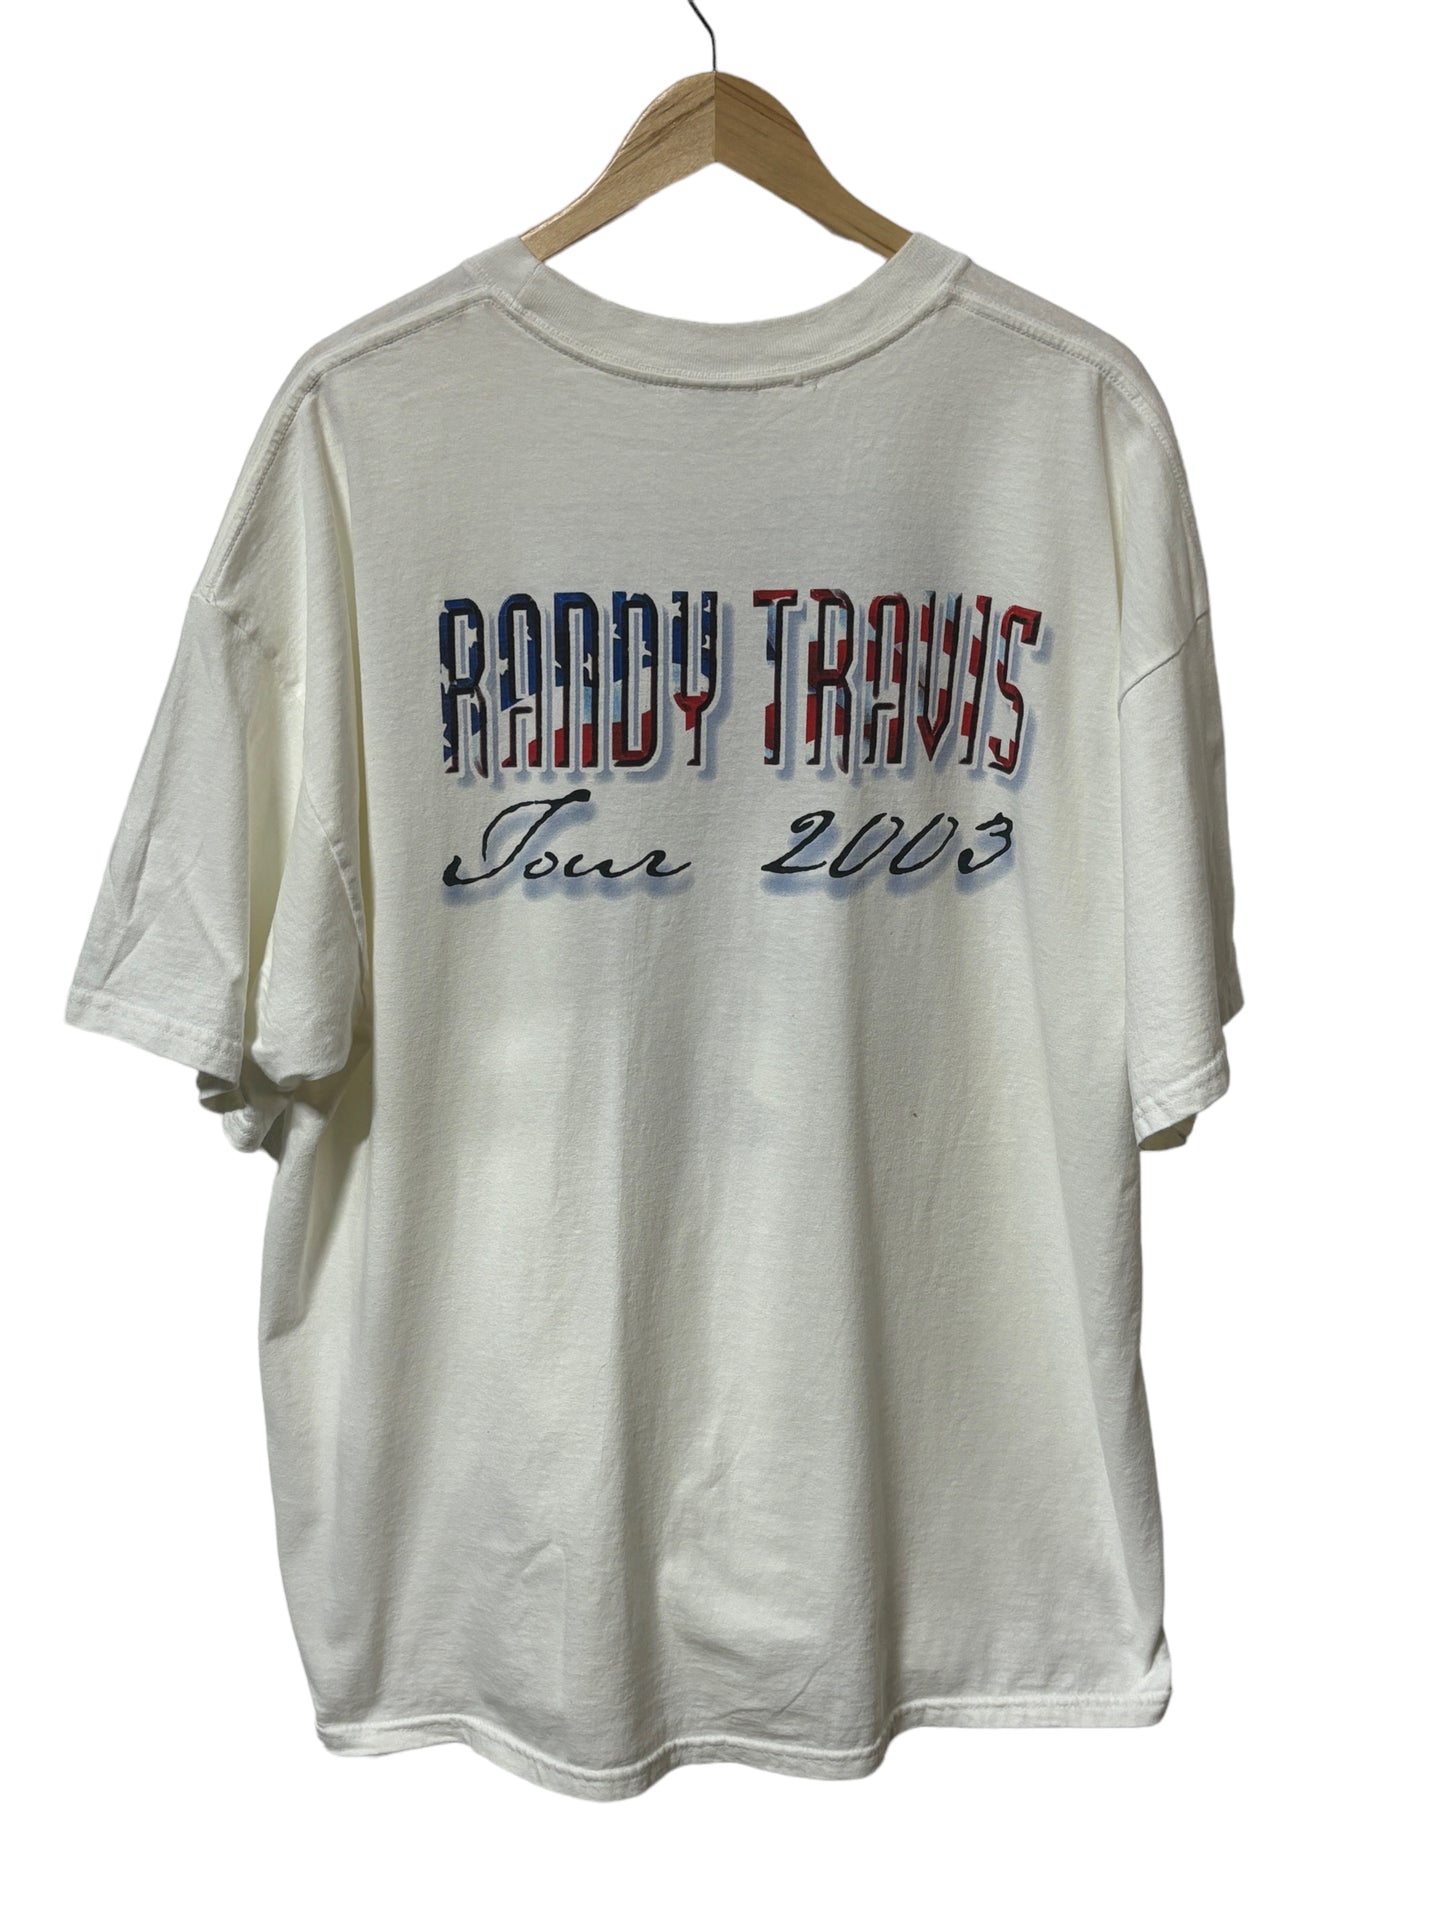 2003 Randy Travis Country Music Concert Tour Tee American Flag Size XXL